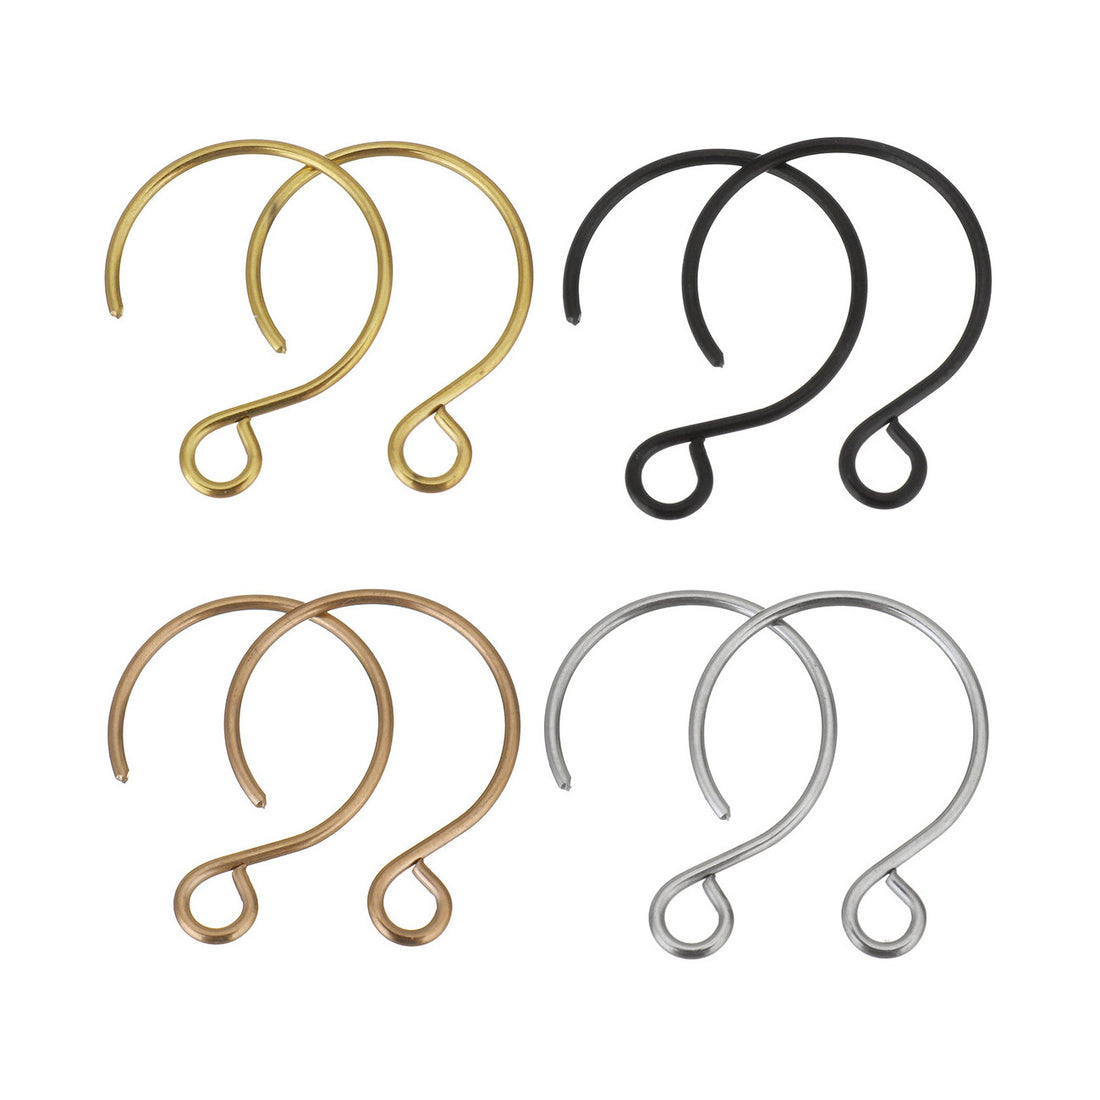 10 Stainless steel round earring hooks - Rose gold, gold, silver or black